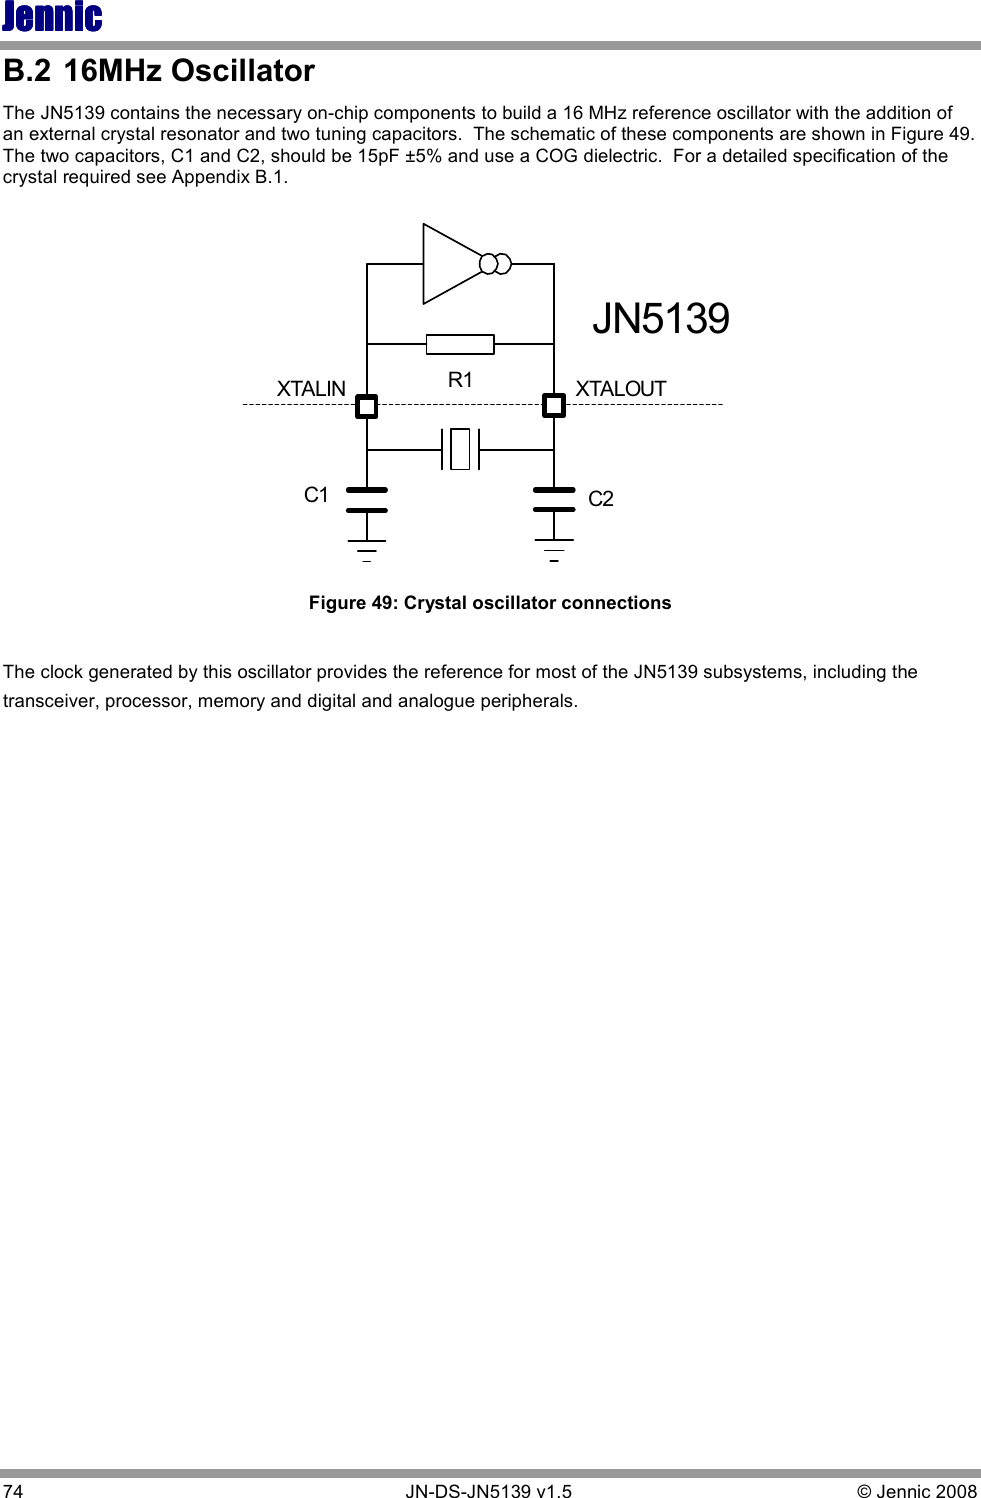 JennicJennicJennicJennic 74        JN-DS-JN5139 v1.5  © Jennic 2008  B.2  16MHz Oscillator The JN5139 contains the necessary on-chip components to build a 16 MHz reference oscillator with the addition of an external crystal resonator and two tuning capacitors.  The schematic of these components are shown in Figure 49.  The two capacitors, C1 and C2, should be 15pF ±5% and use a COG dielectric.  For a detailed specification of the crystal required see Appendix B.1. XTALOUTC2C1R1XTALINJN5139 Figure 49: Crystal oscillator connections  The clock generated by this oscillator provides the reference for most of the JN5139 subsystems, including the transceiver, processor, memory and digital and analogue peripherals.   